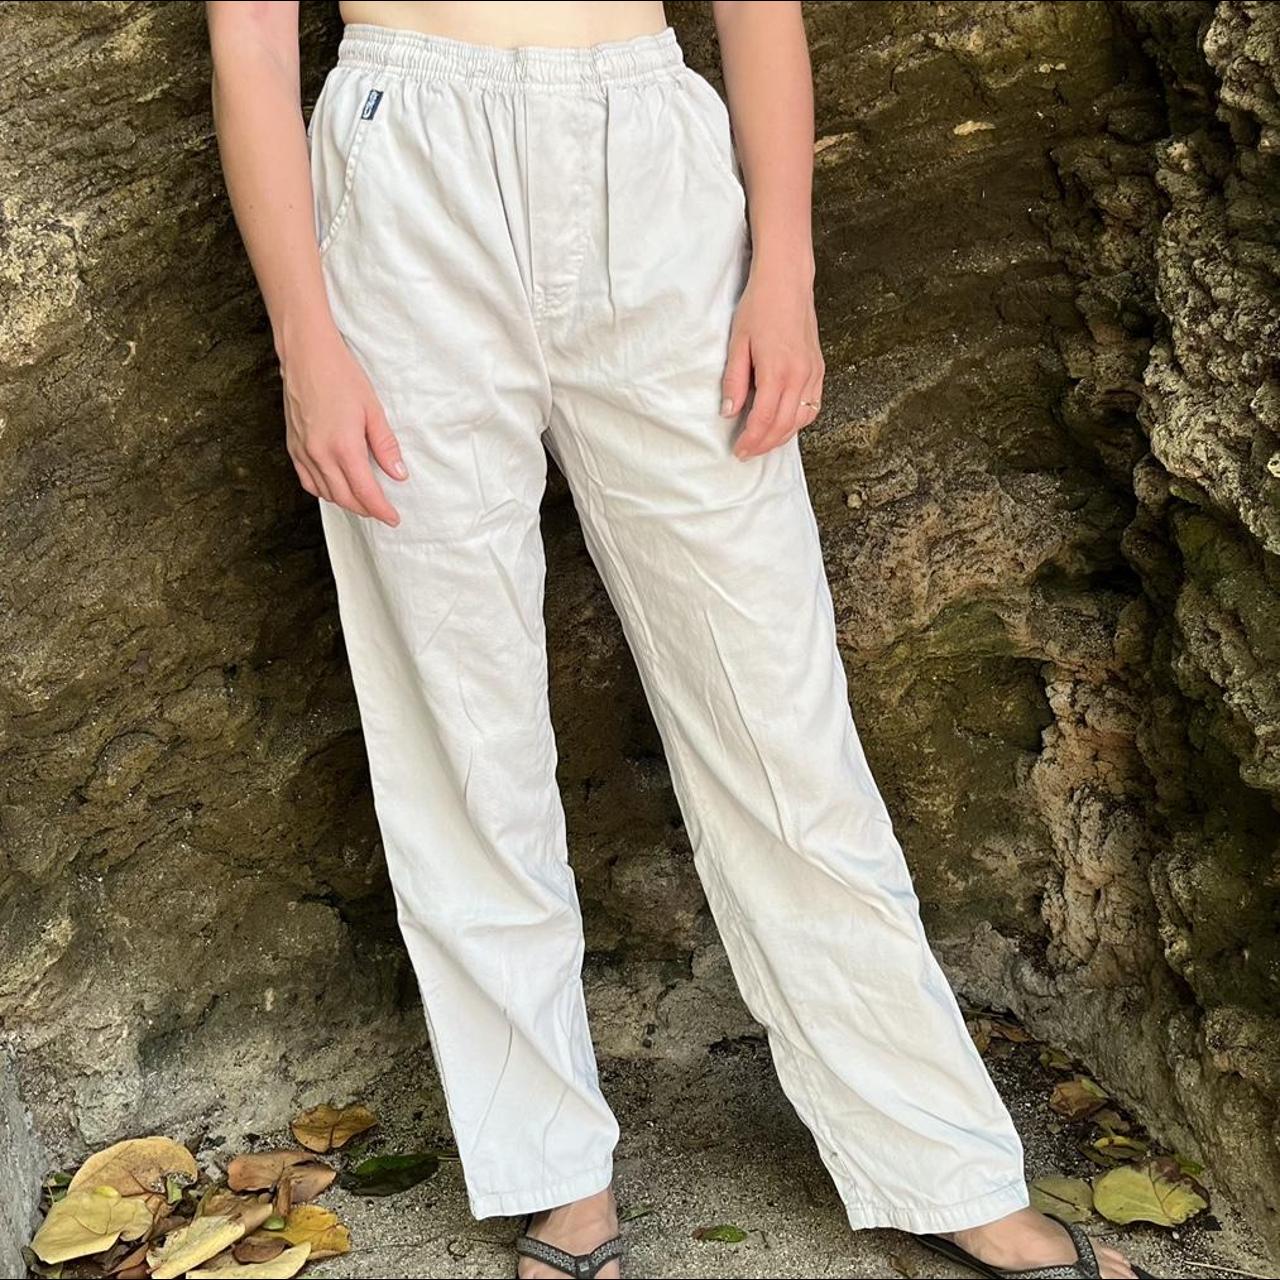 What color blouses would go with these cream colored pants? : r/OUTFITS